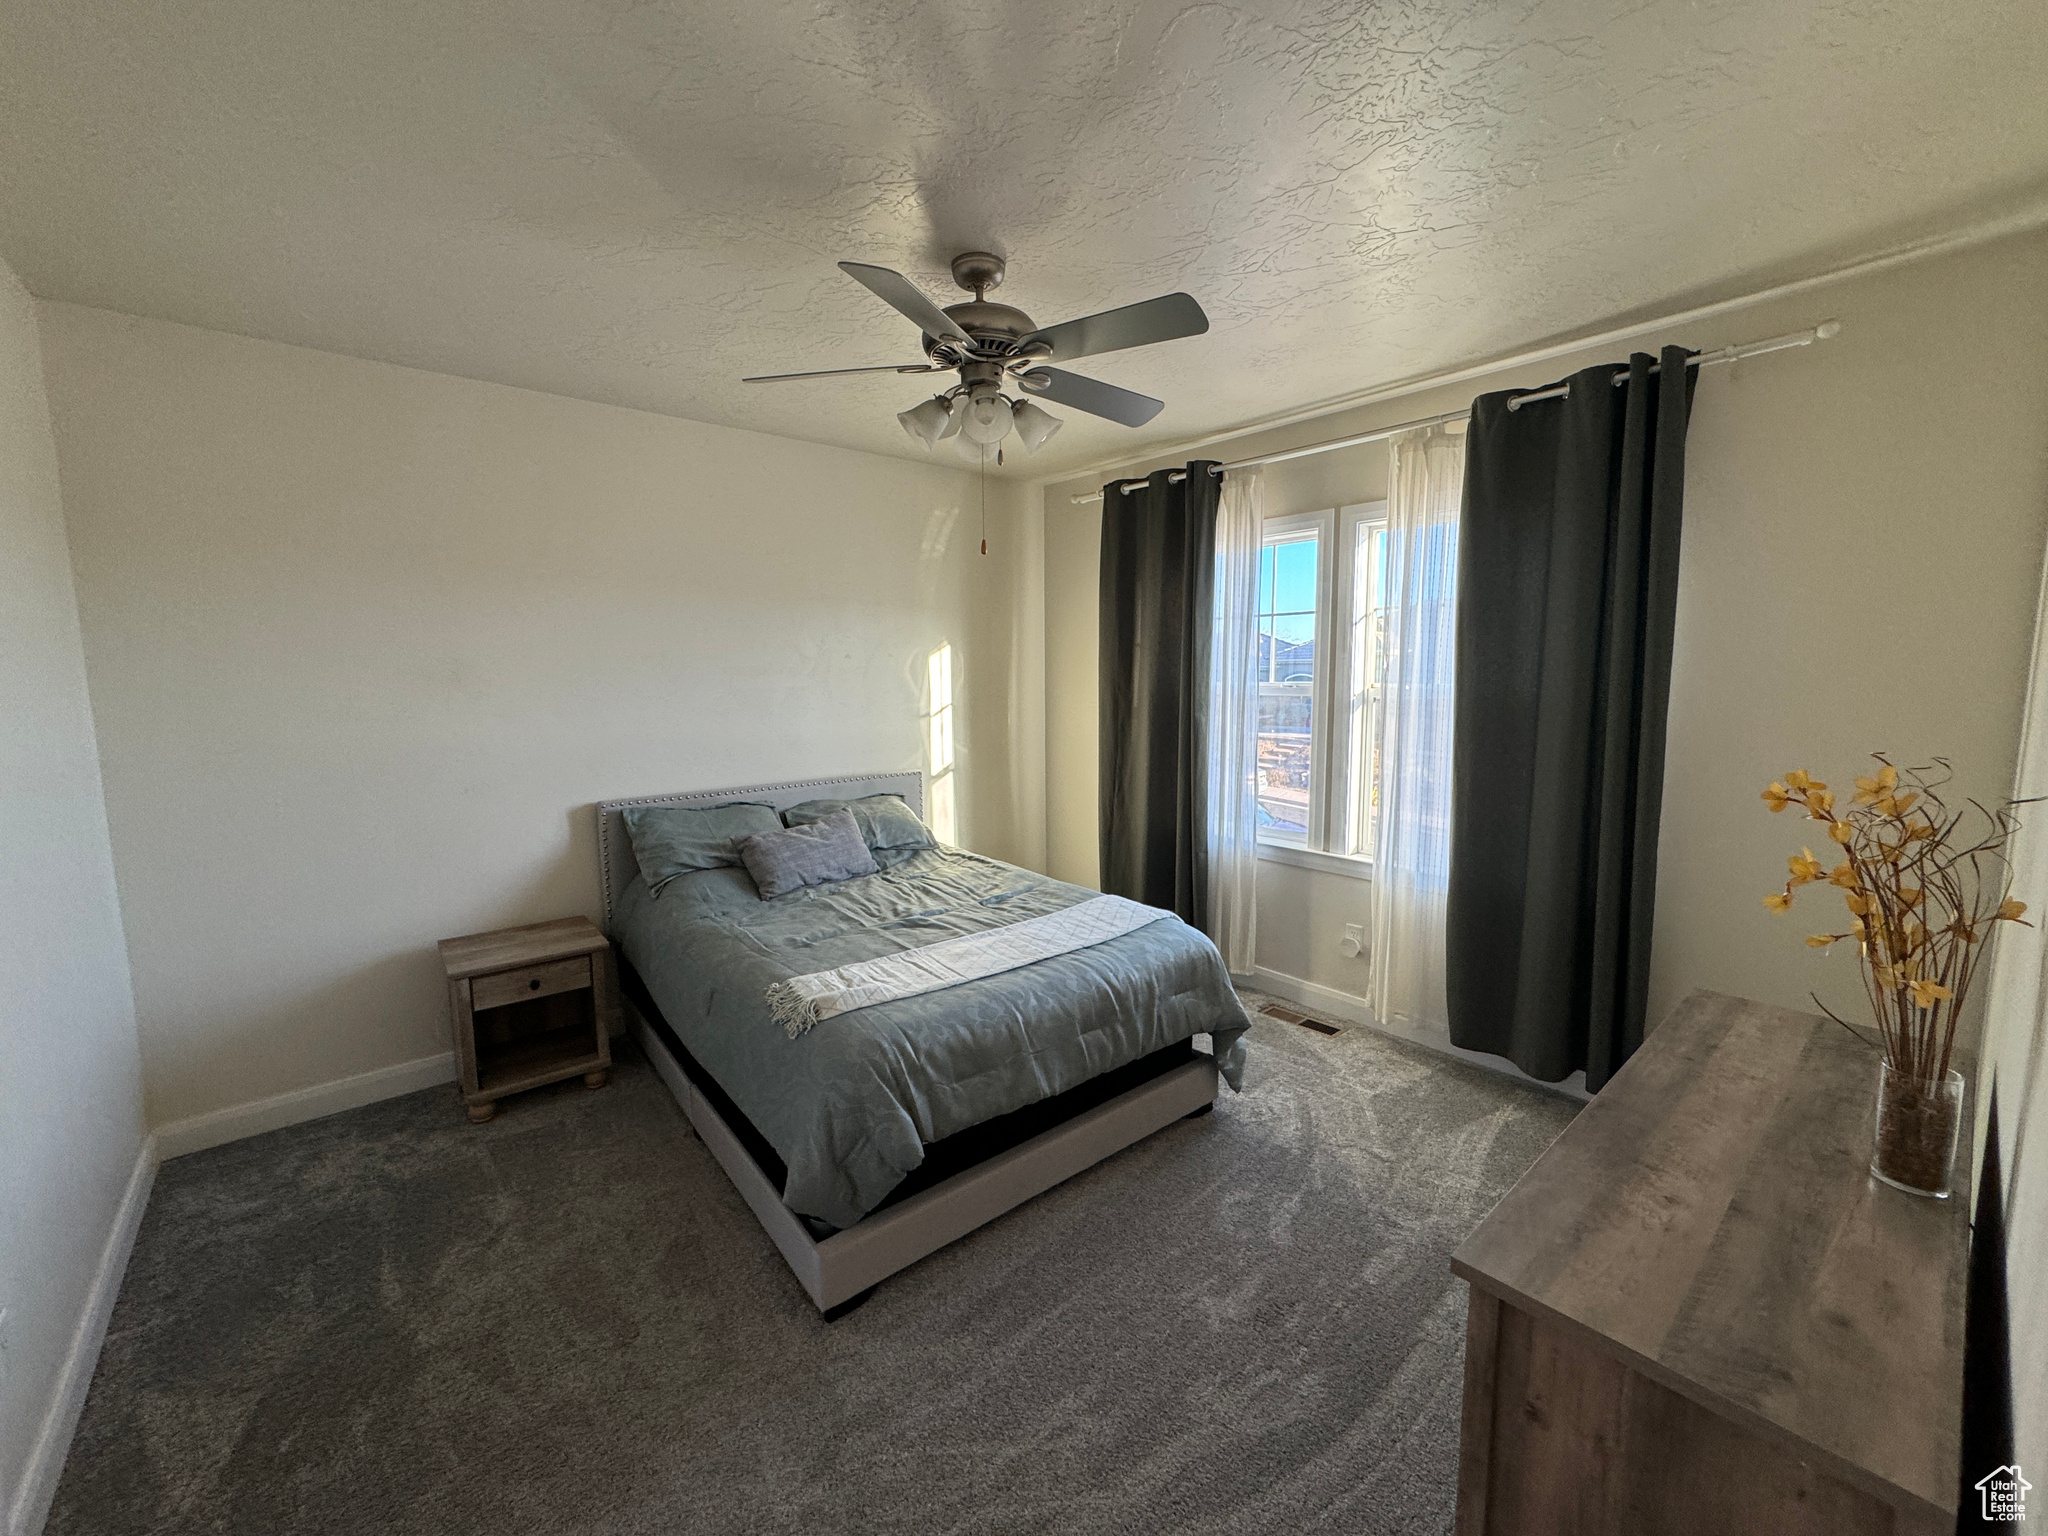 Master Bedroom with dark colored carpet, ceiling fan, and a textured ceiling